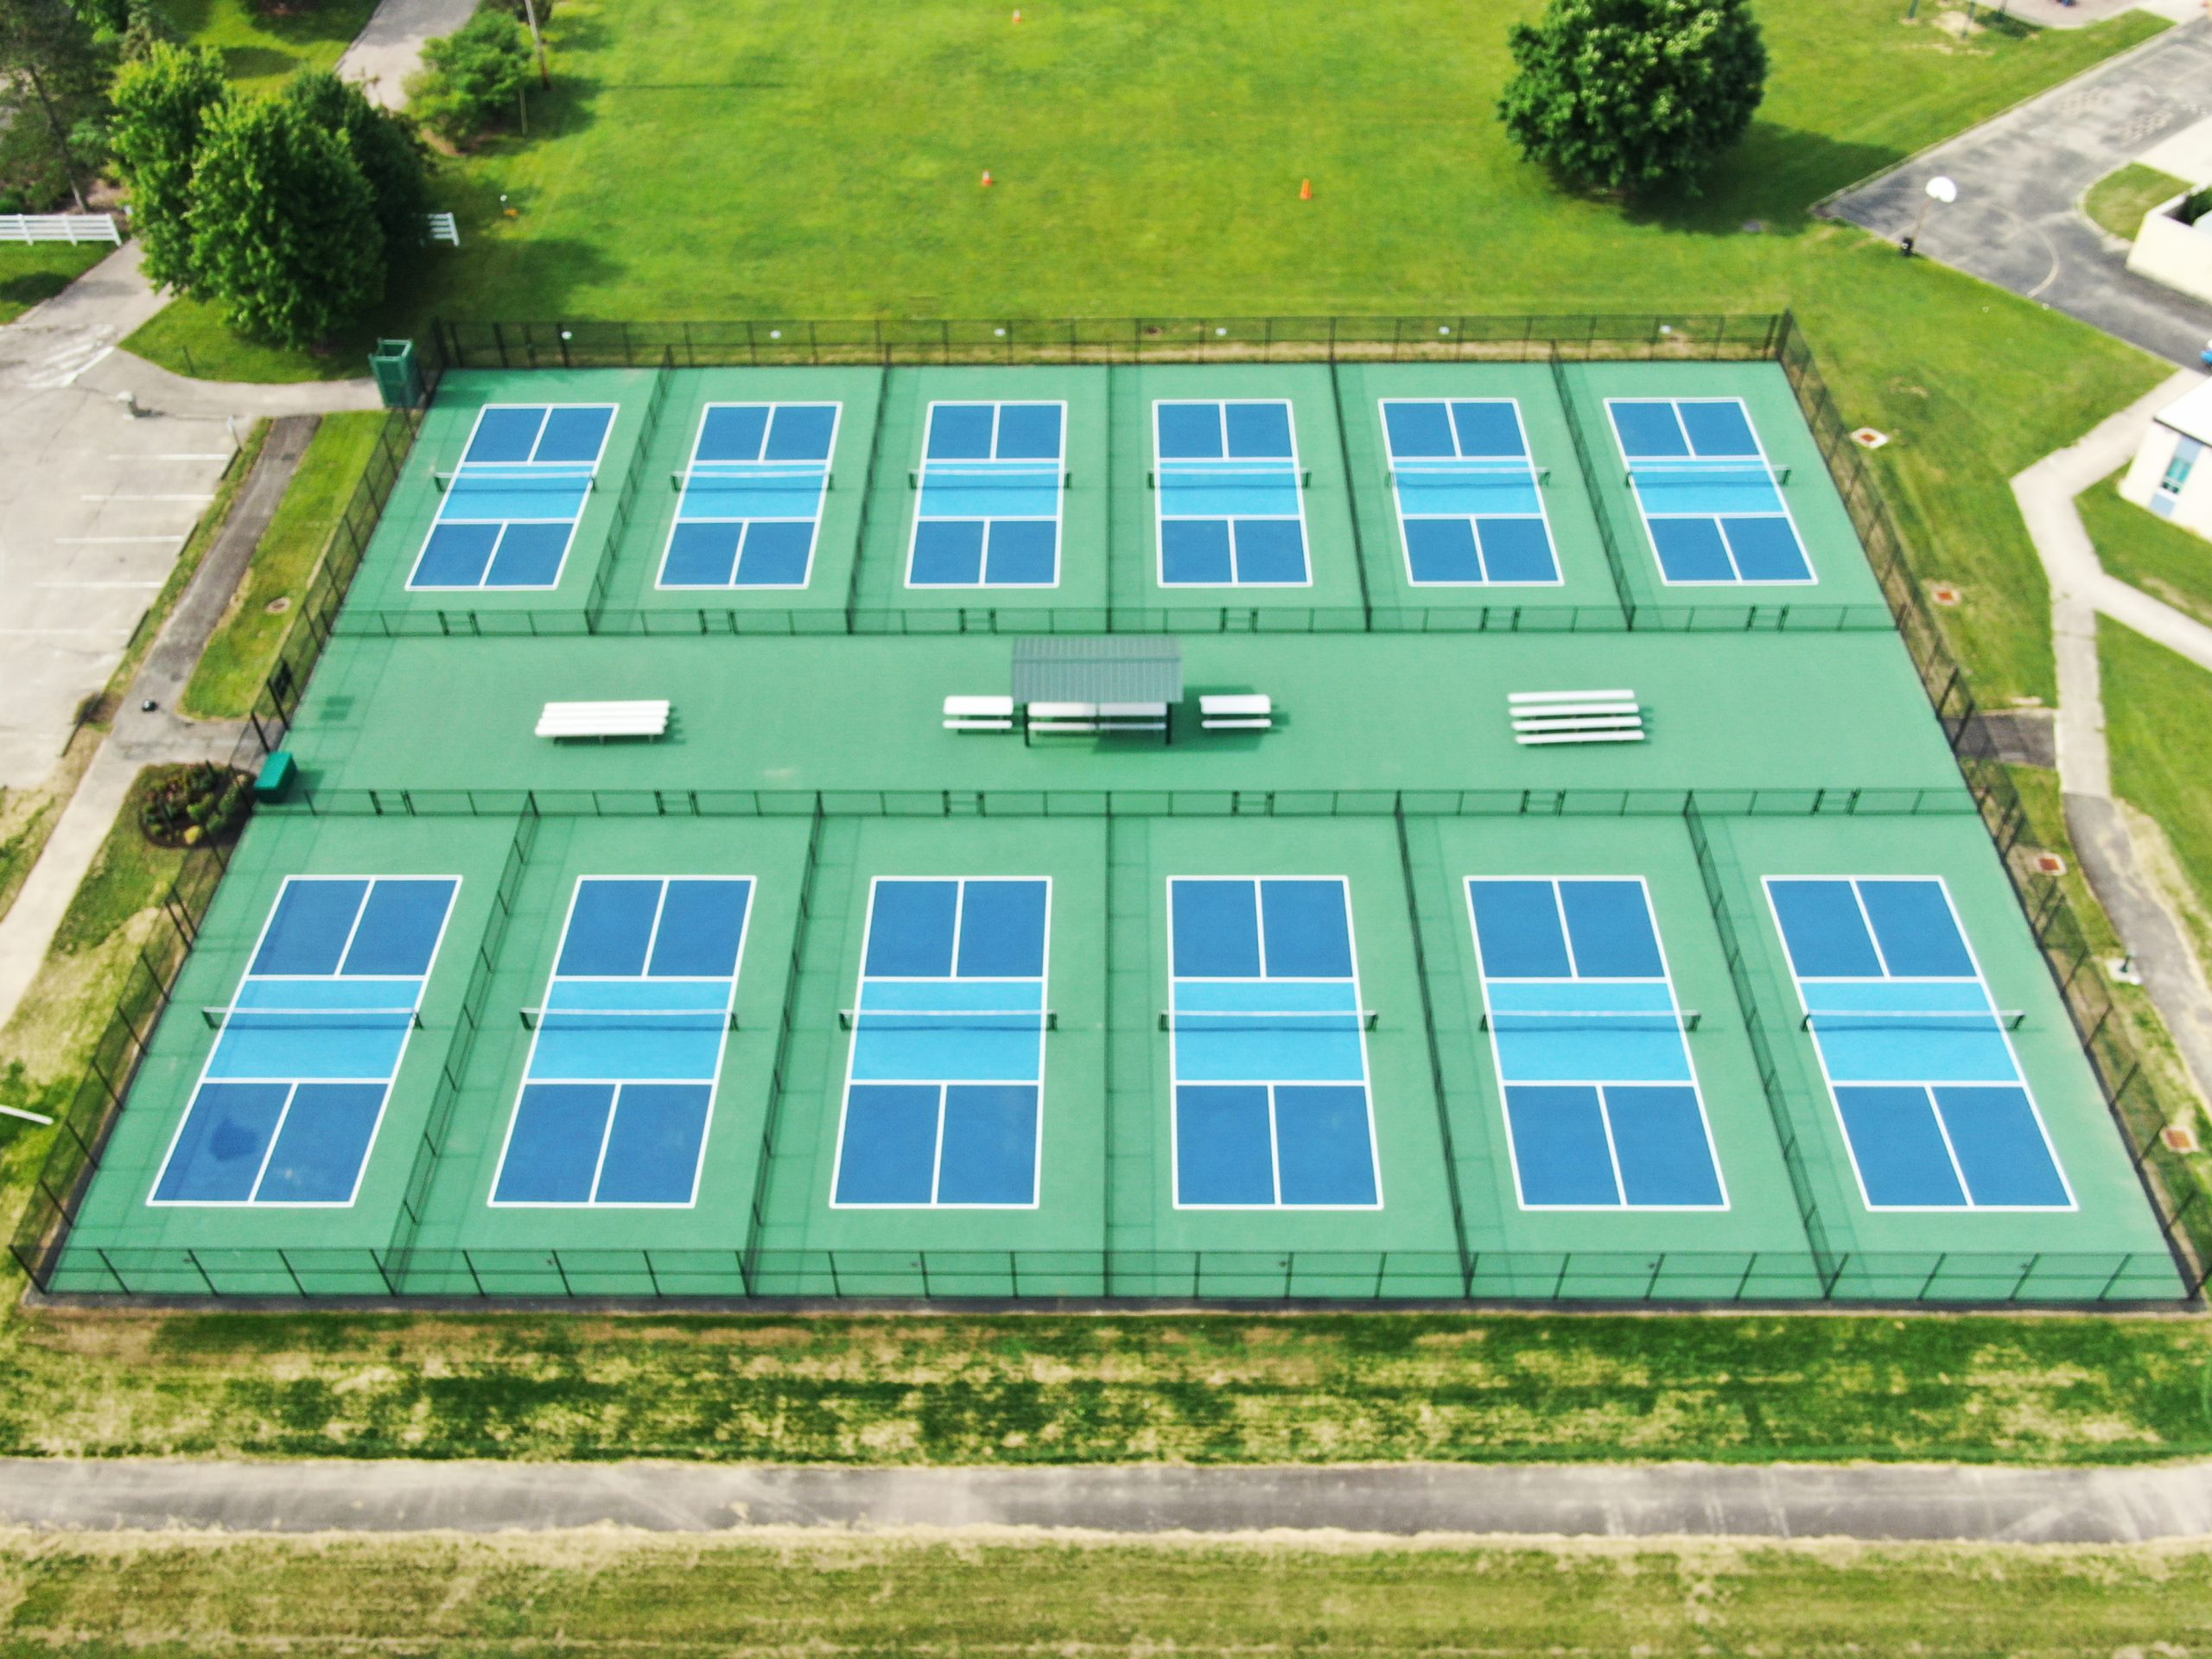 Kennedy Park Pickleball Courts Play Kettering